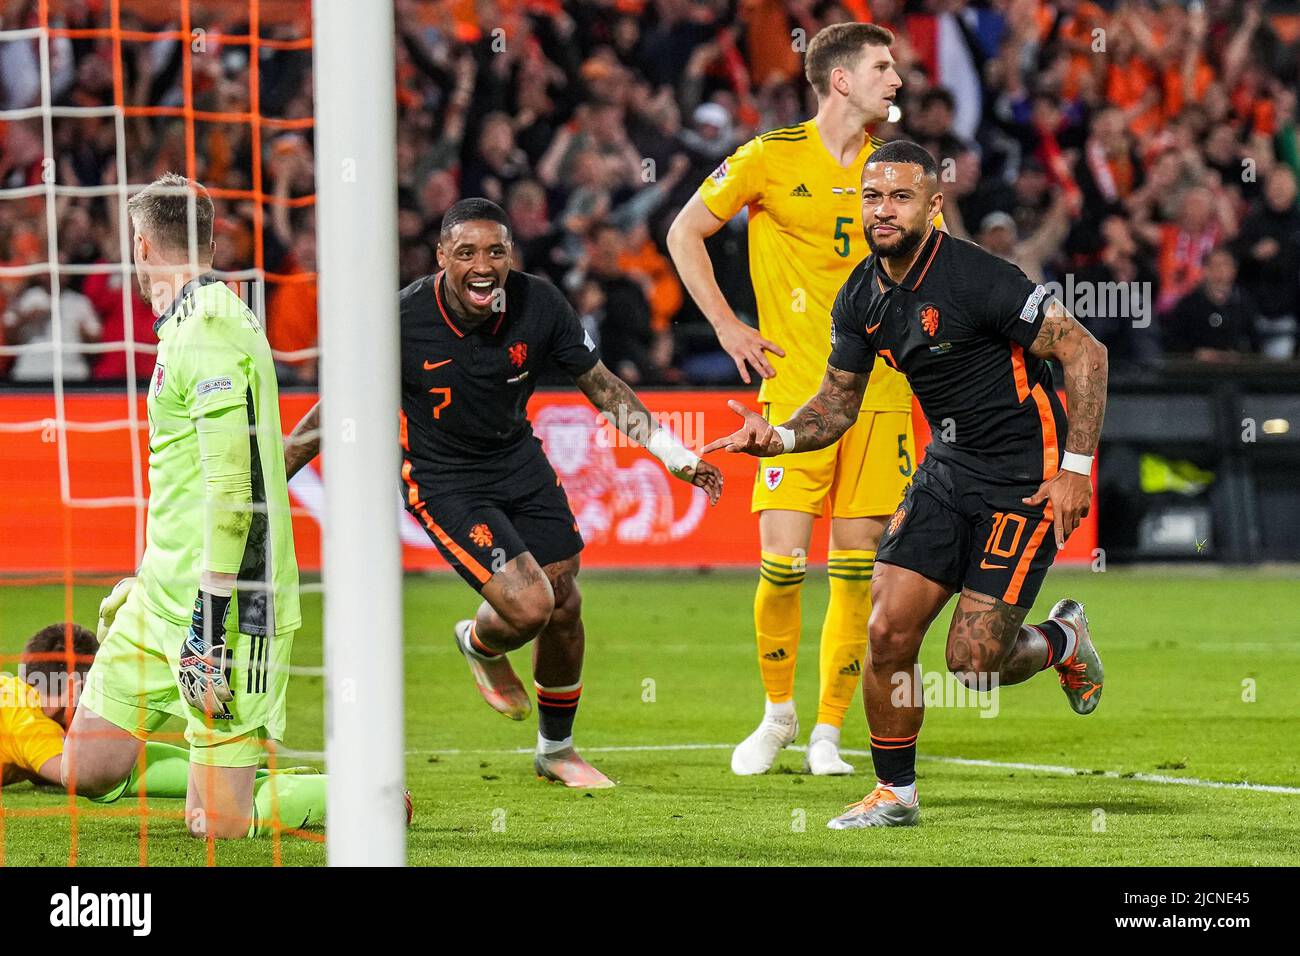 Rotterdam, Netherlands. 14 June 2022, Rotterdam, Netherlands. 14 June 2022, Memphis Depay of Holland celebrates the 3-2 during the match between Holland v Wales at Stadion Feijenoord de Kuip on 14 June 2022 in Rotterdam, Netherlands. (Box to Box Pictures/Yannick Verhoeven) Stock Photo